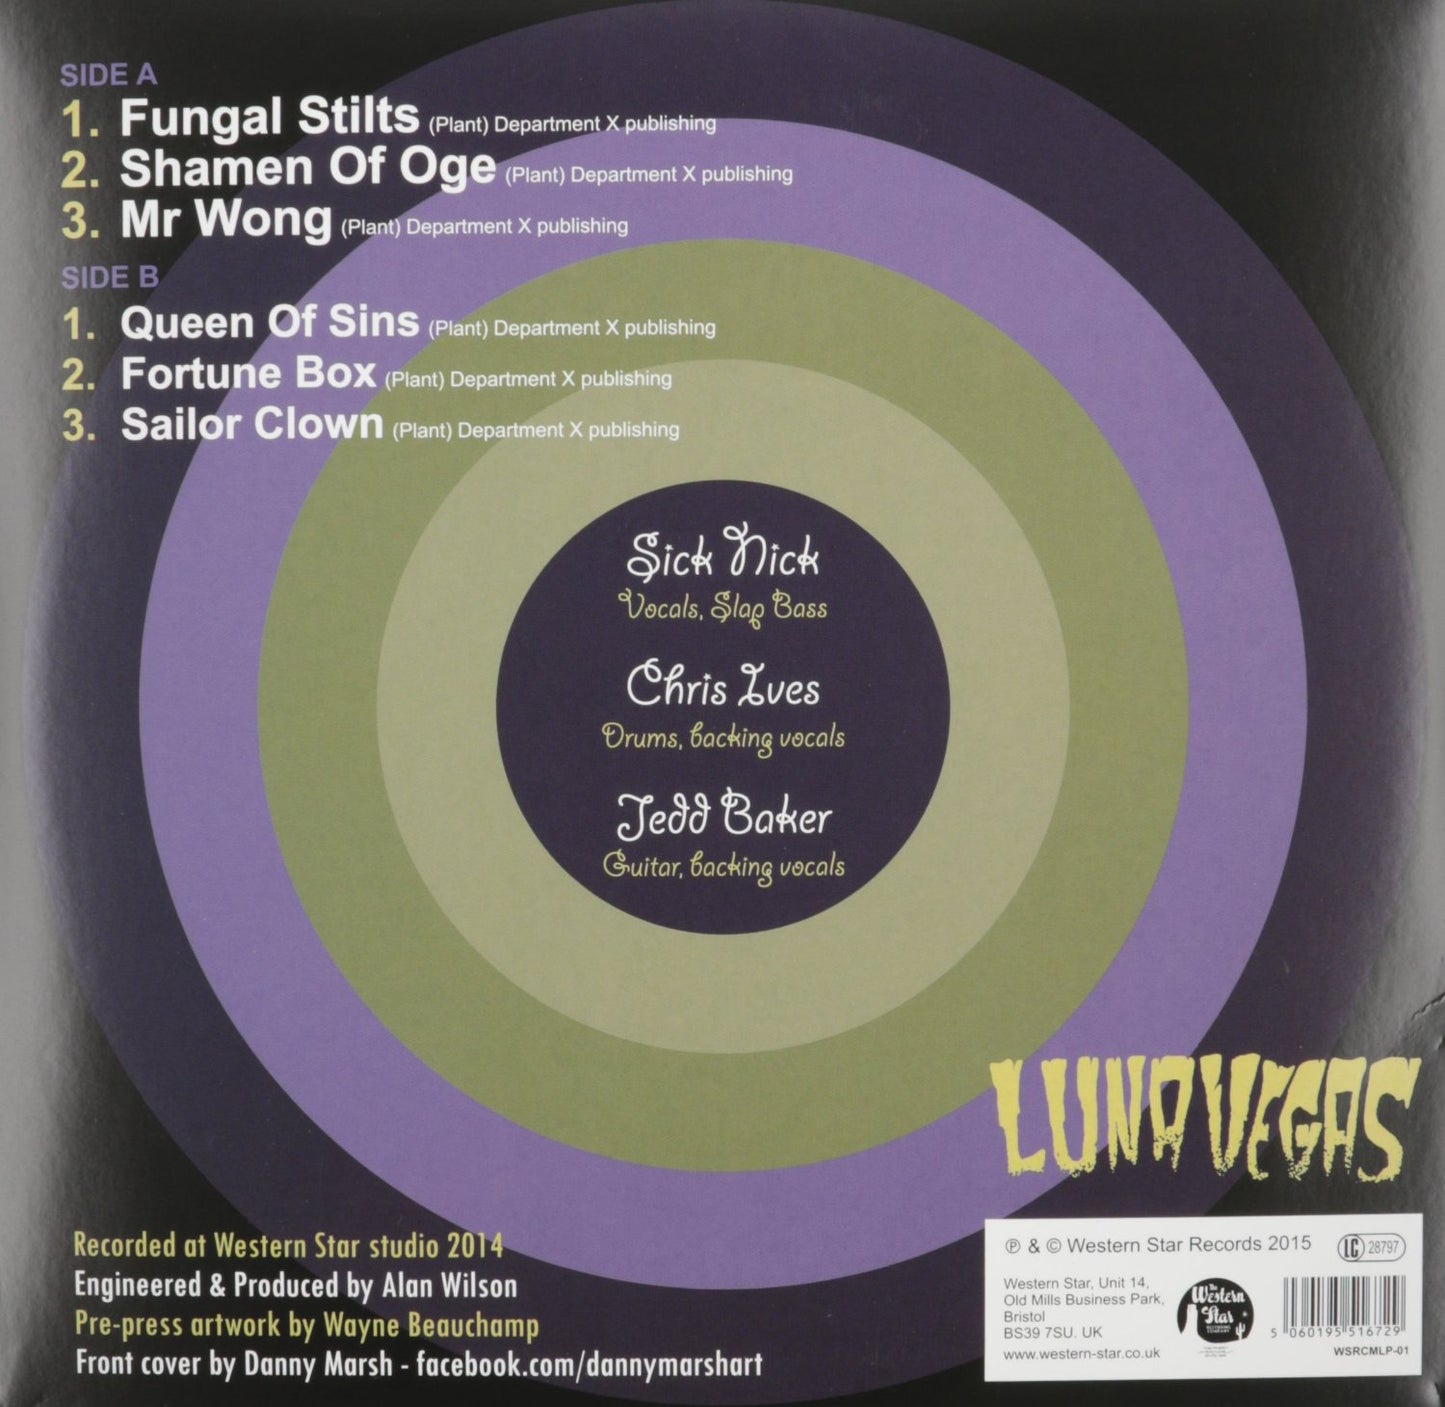 10inch - Luna Vegas - From The Travelling Minstrels Of Doom